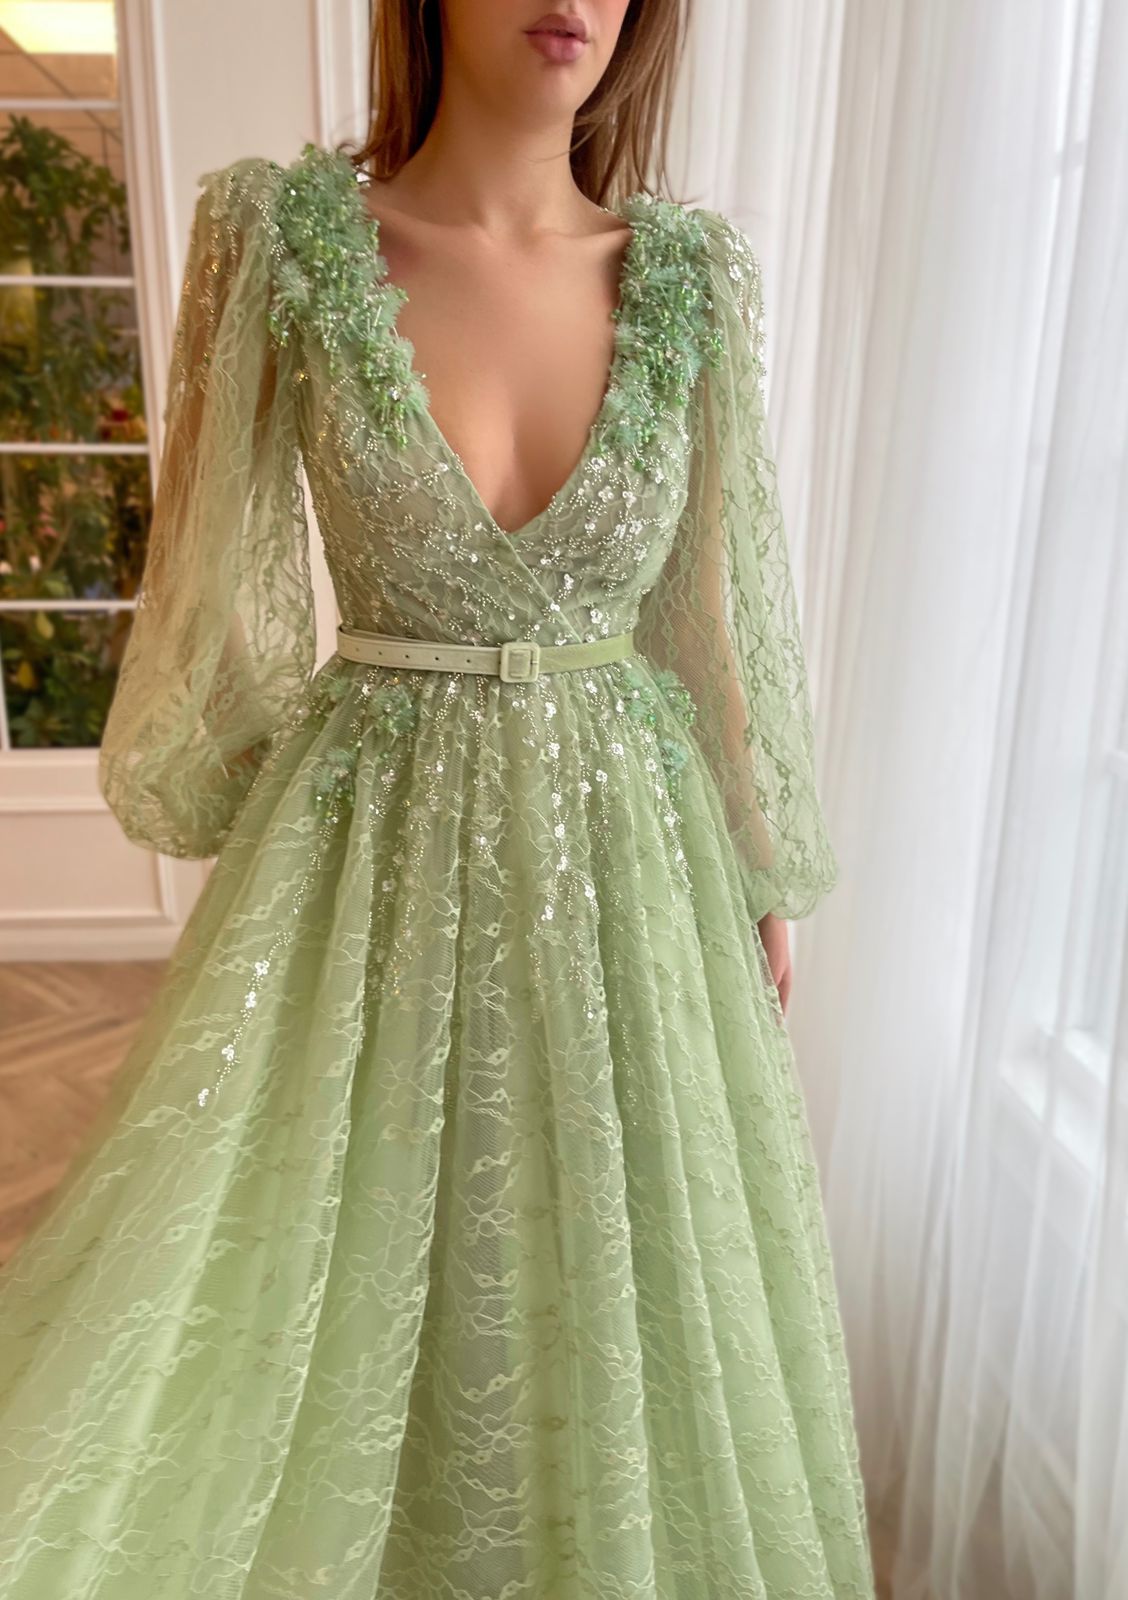 Green A-Line dress with belt, embroidery, v-neck and long sleeves